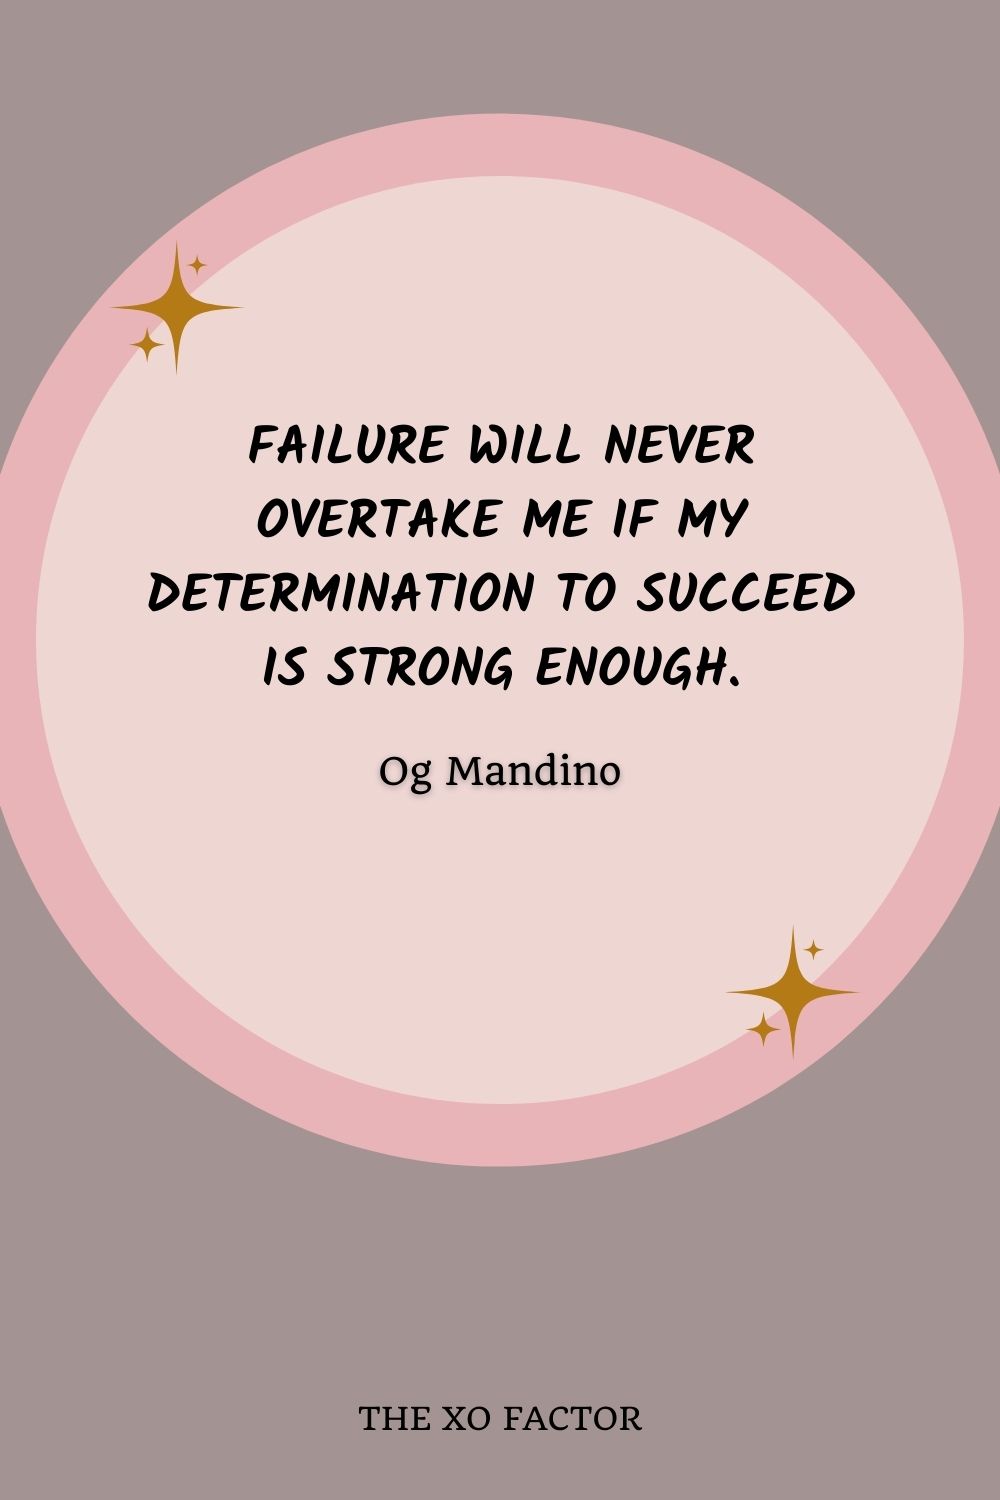 Failure will never overtake me if my determination to succeed is strong enough.” – Og Mandino